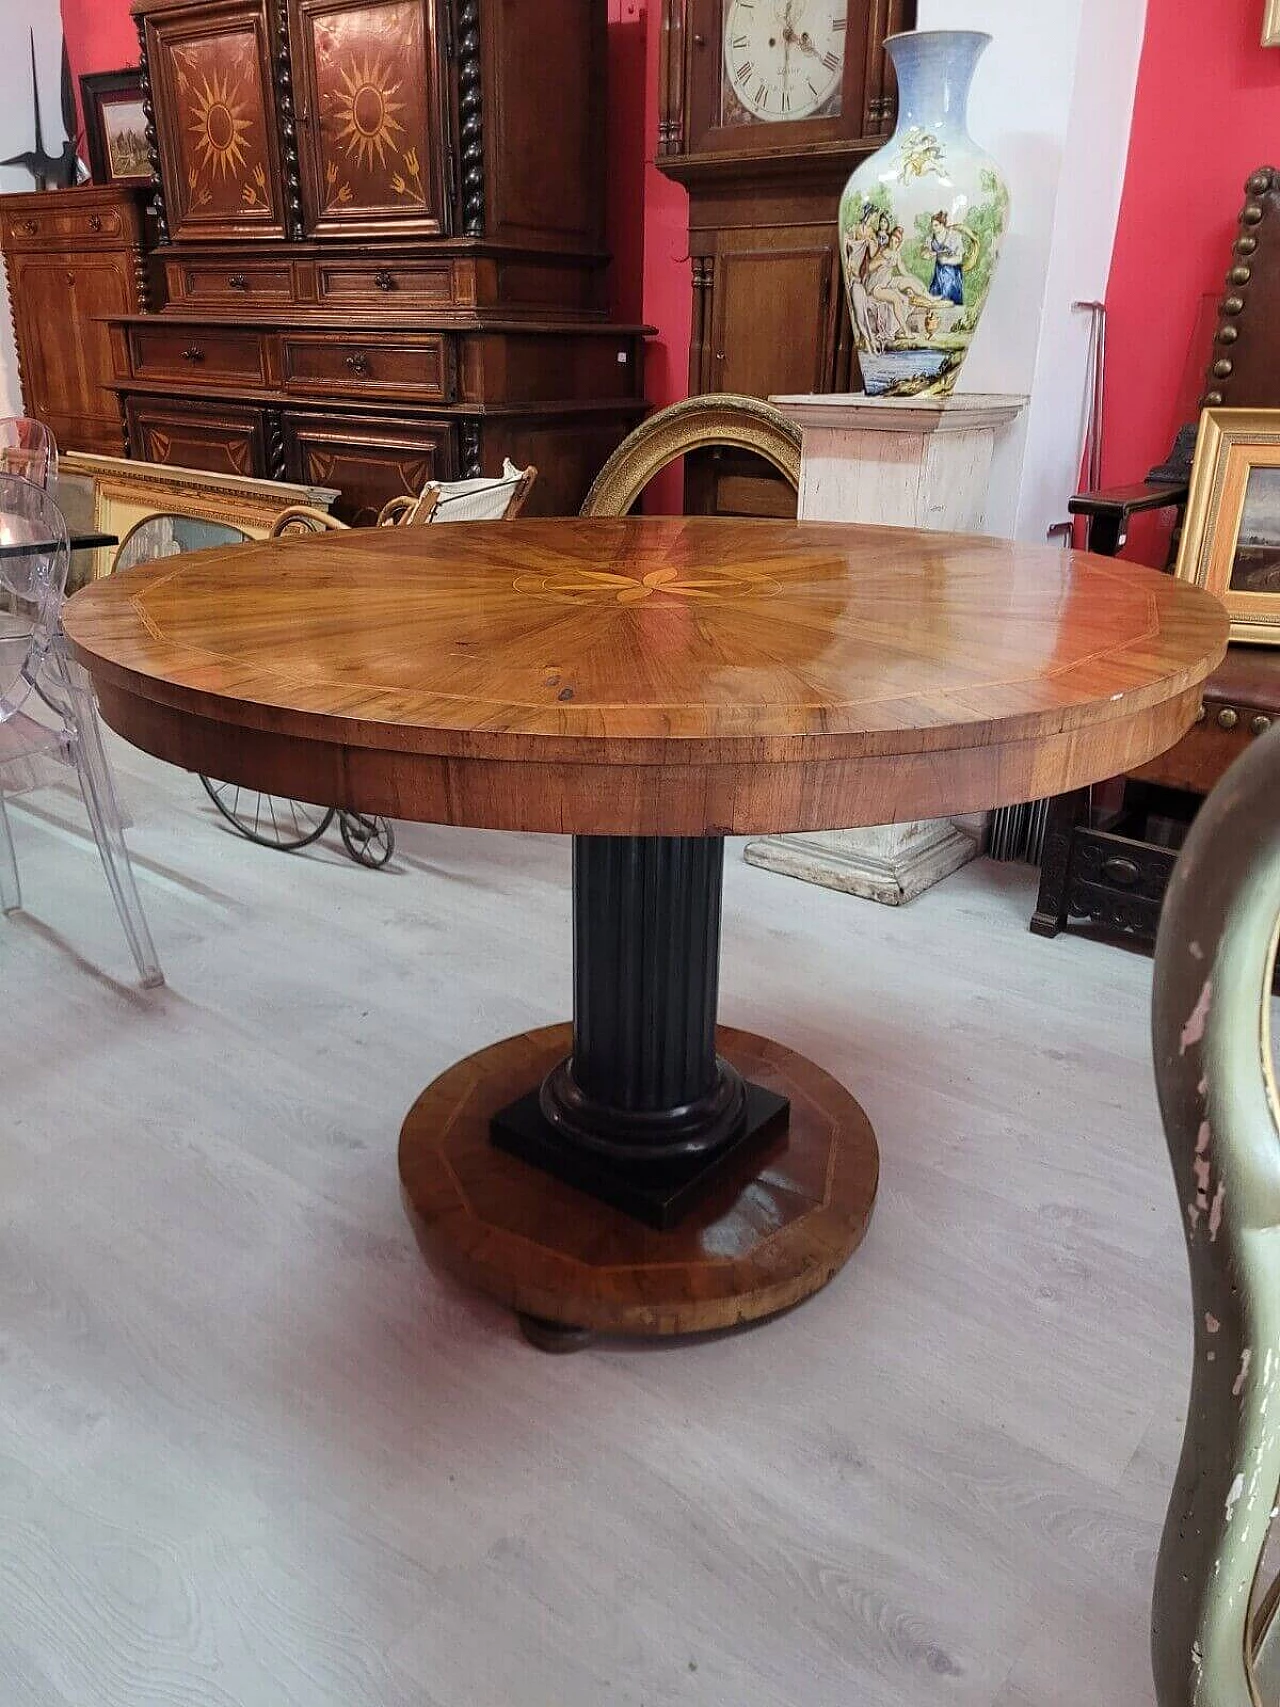 Empire round table panelled in walnut with maple inlay, early 19th century 4